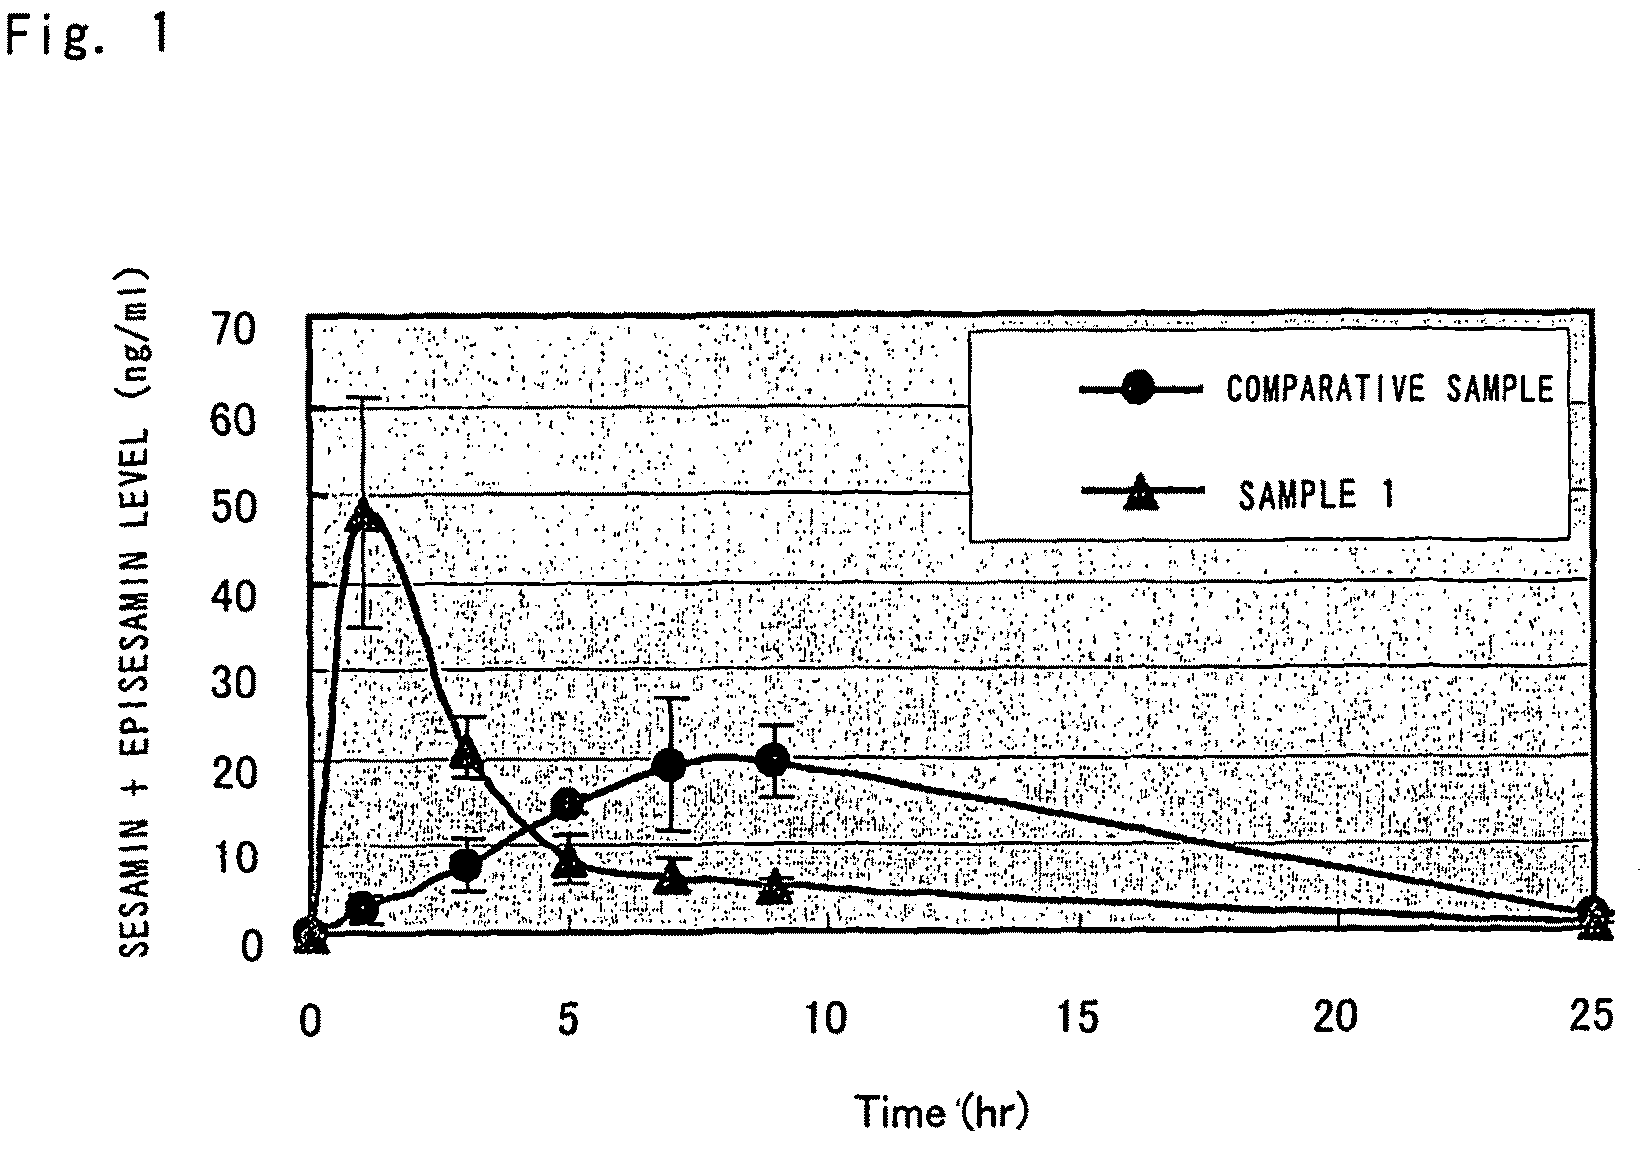 Oil-in-water emulsions containing lignan-class compounds and compositions containing the same